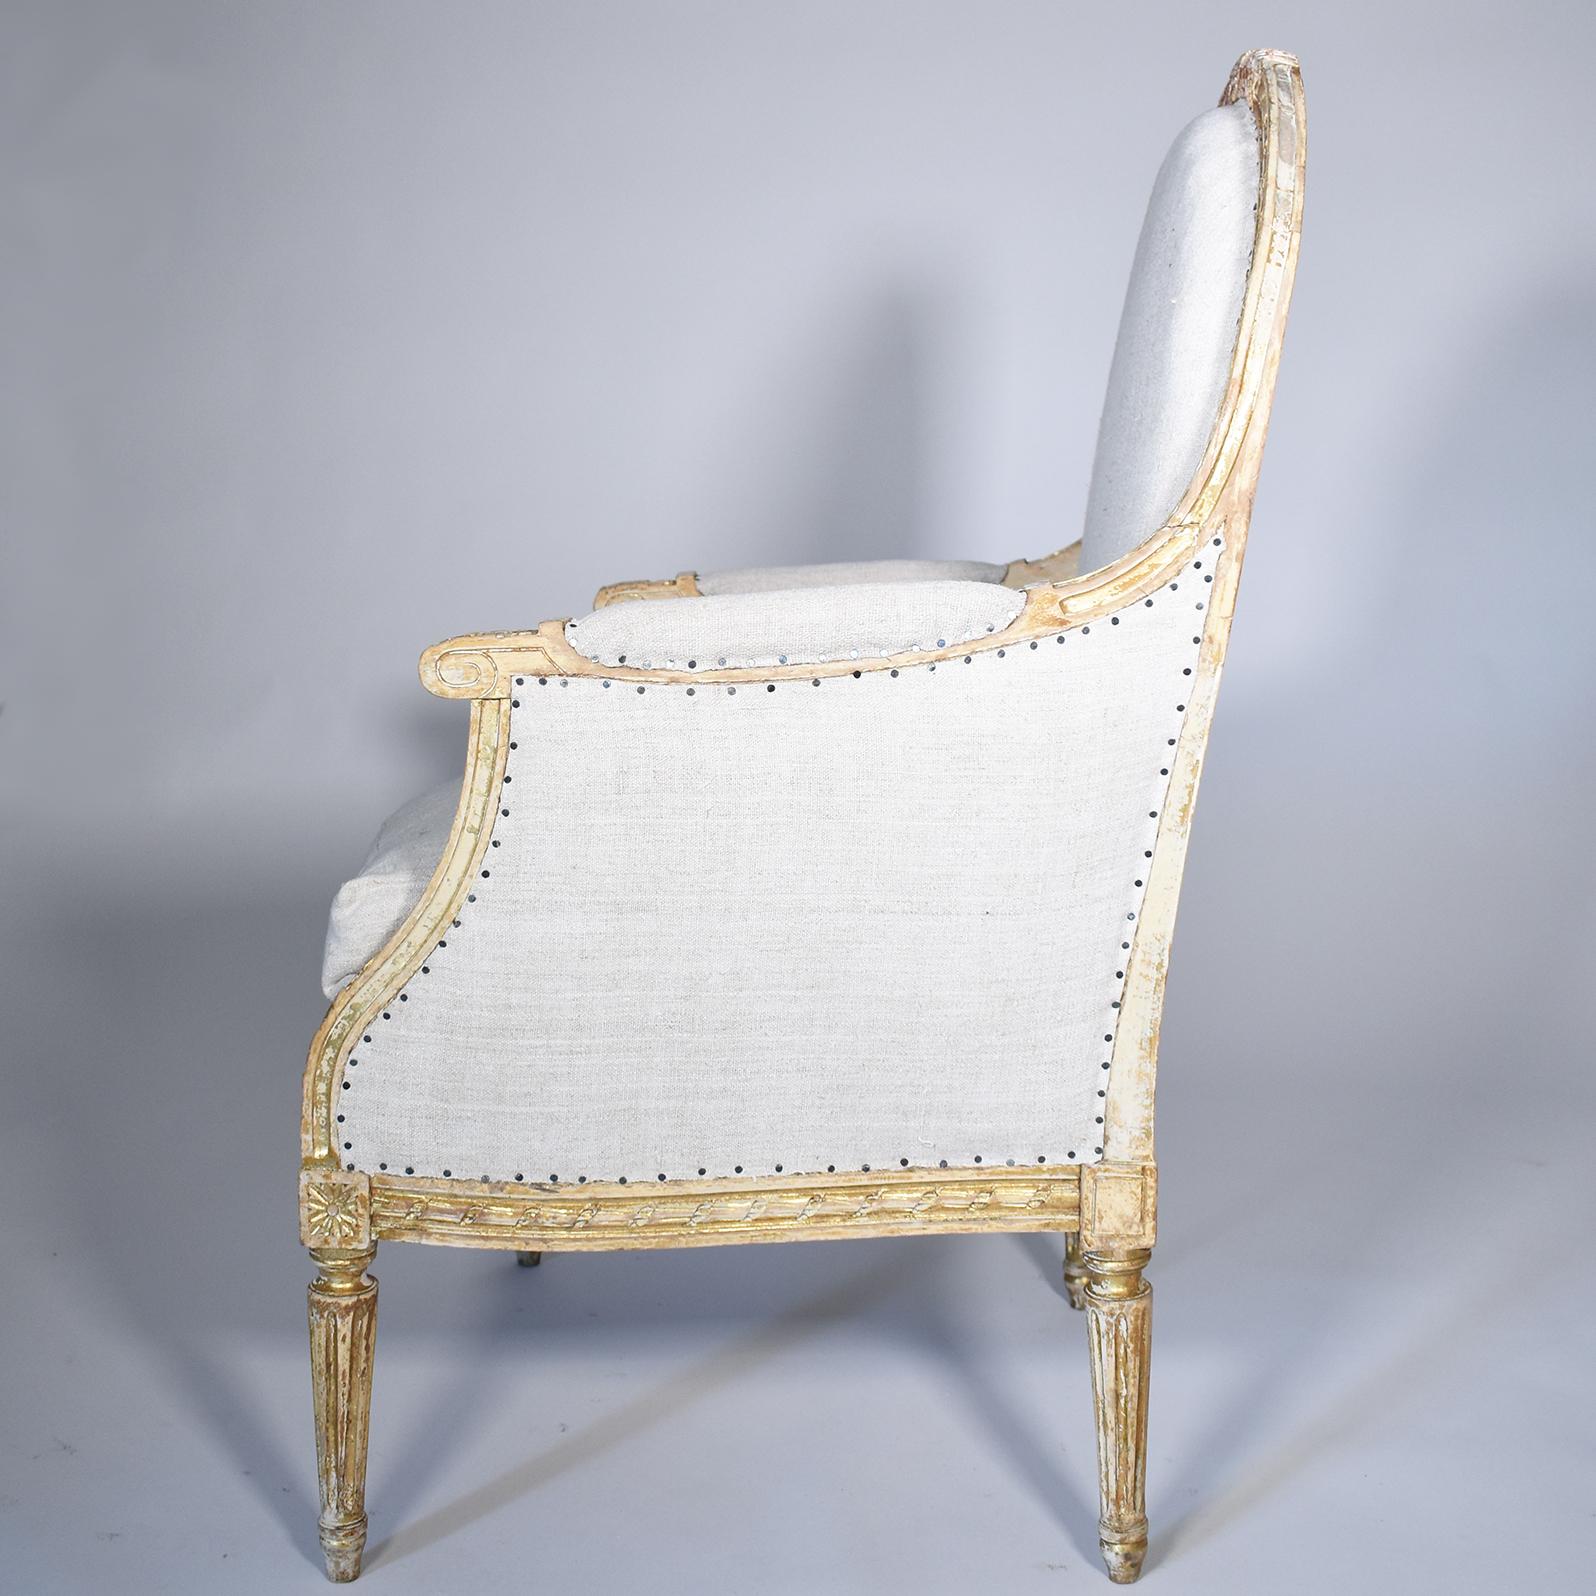 Grand scale 19th century French gilded Bergère armchair has elegant carving on chair frame, apron and fluted legs. Scattered losses on gilding and carving. Upholstered in European burlap and simple nailheads.